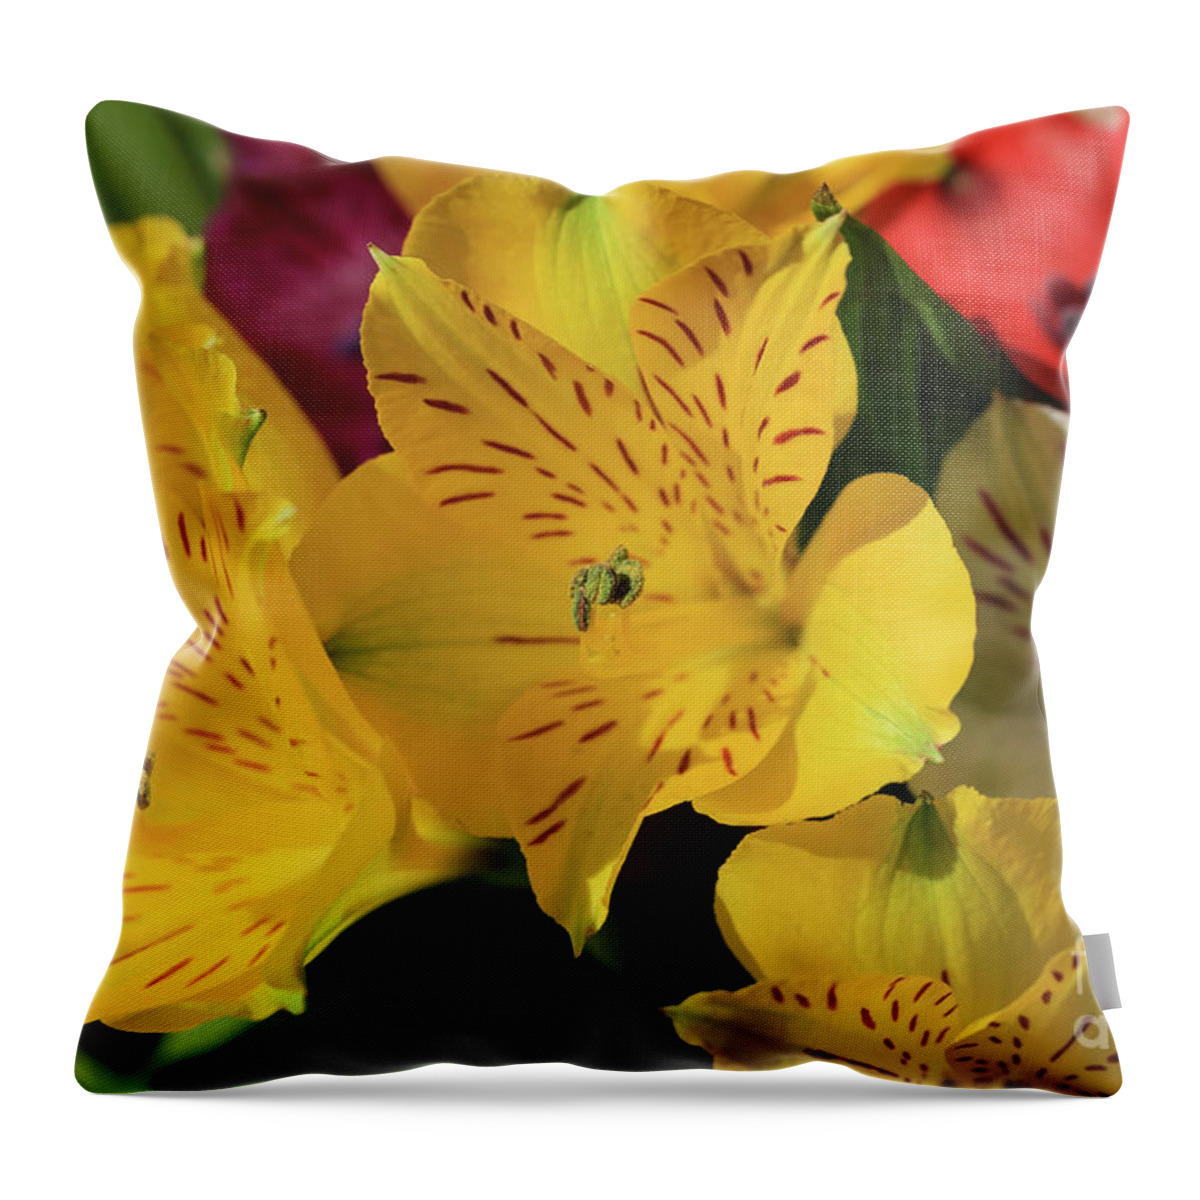 Peruvian Lily Perfection Throw Pillow featuring the photograph Peruvian Lily Perfection by Rachel Cohen